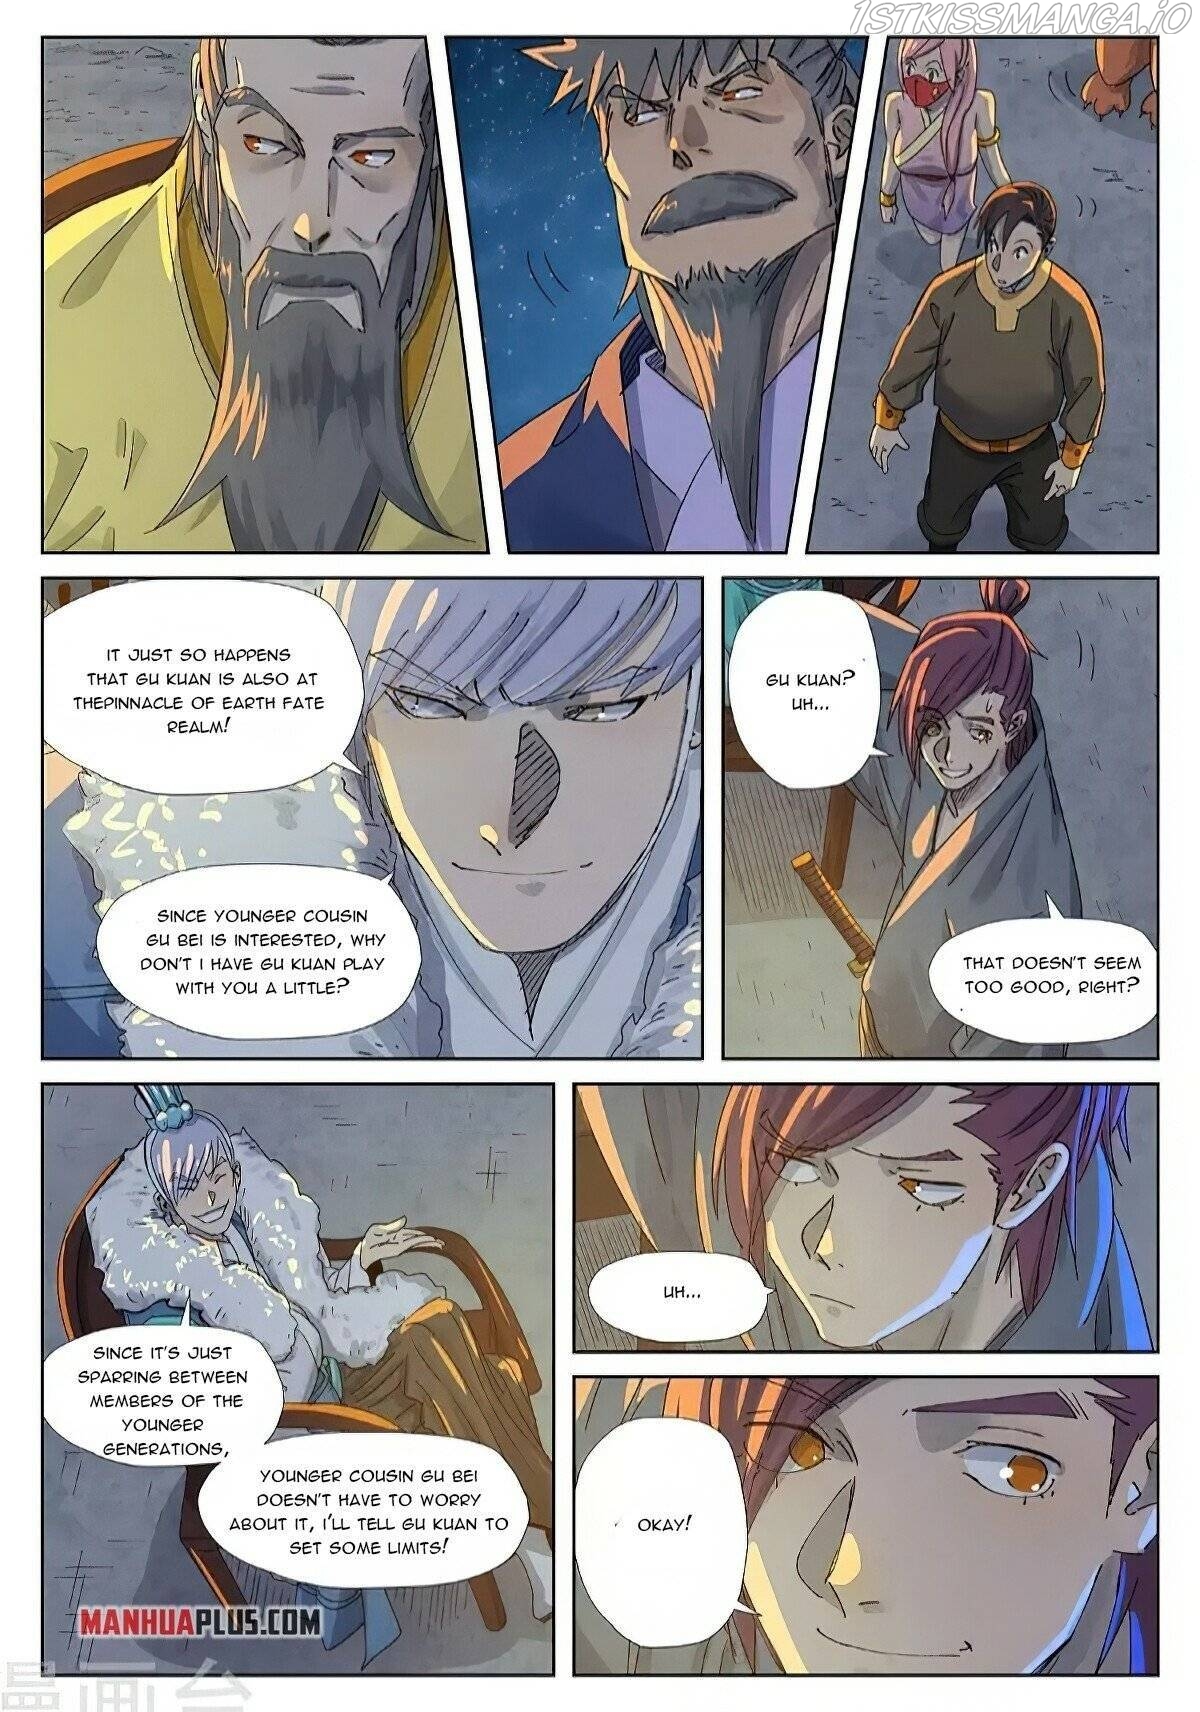 Tales of Demons and Gods Manhua Chapter 349.1 - Page 4